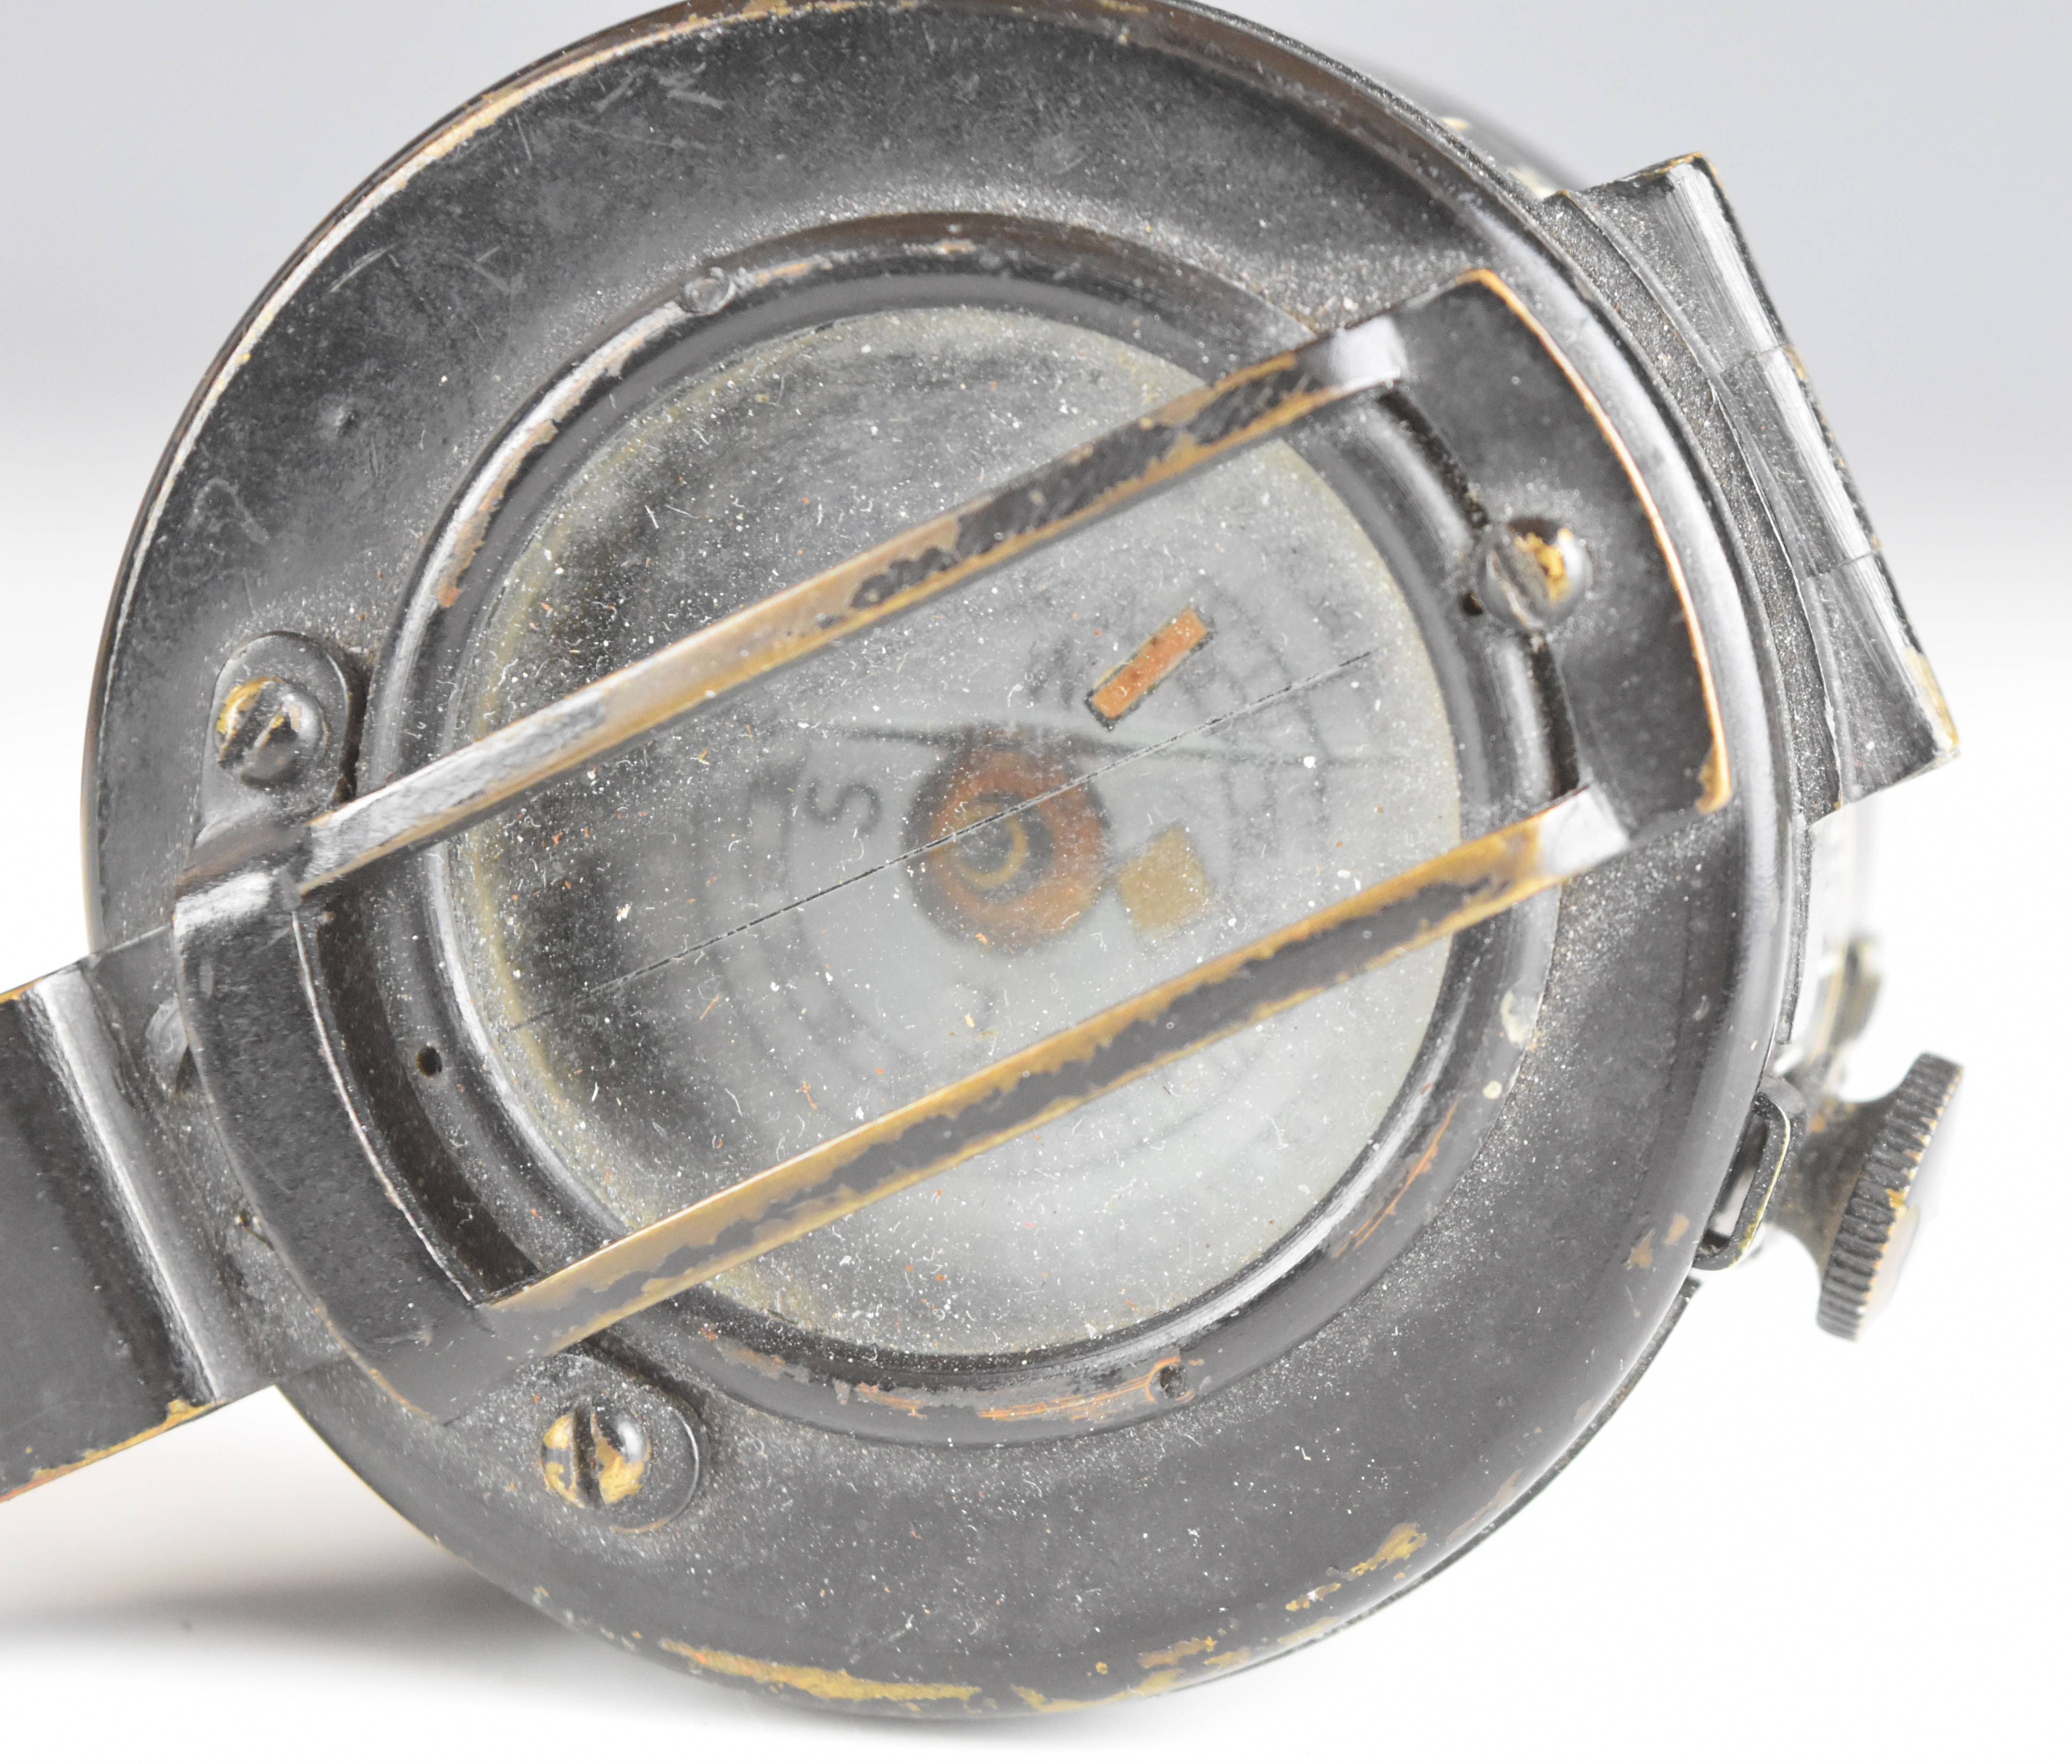 British WW2 prismatic compass by T G Co Ltd, London No B187104 1942 Mk III, with broad arrow mark, - Image 4 of 10